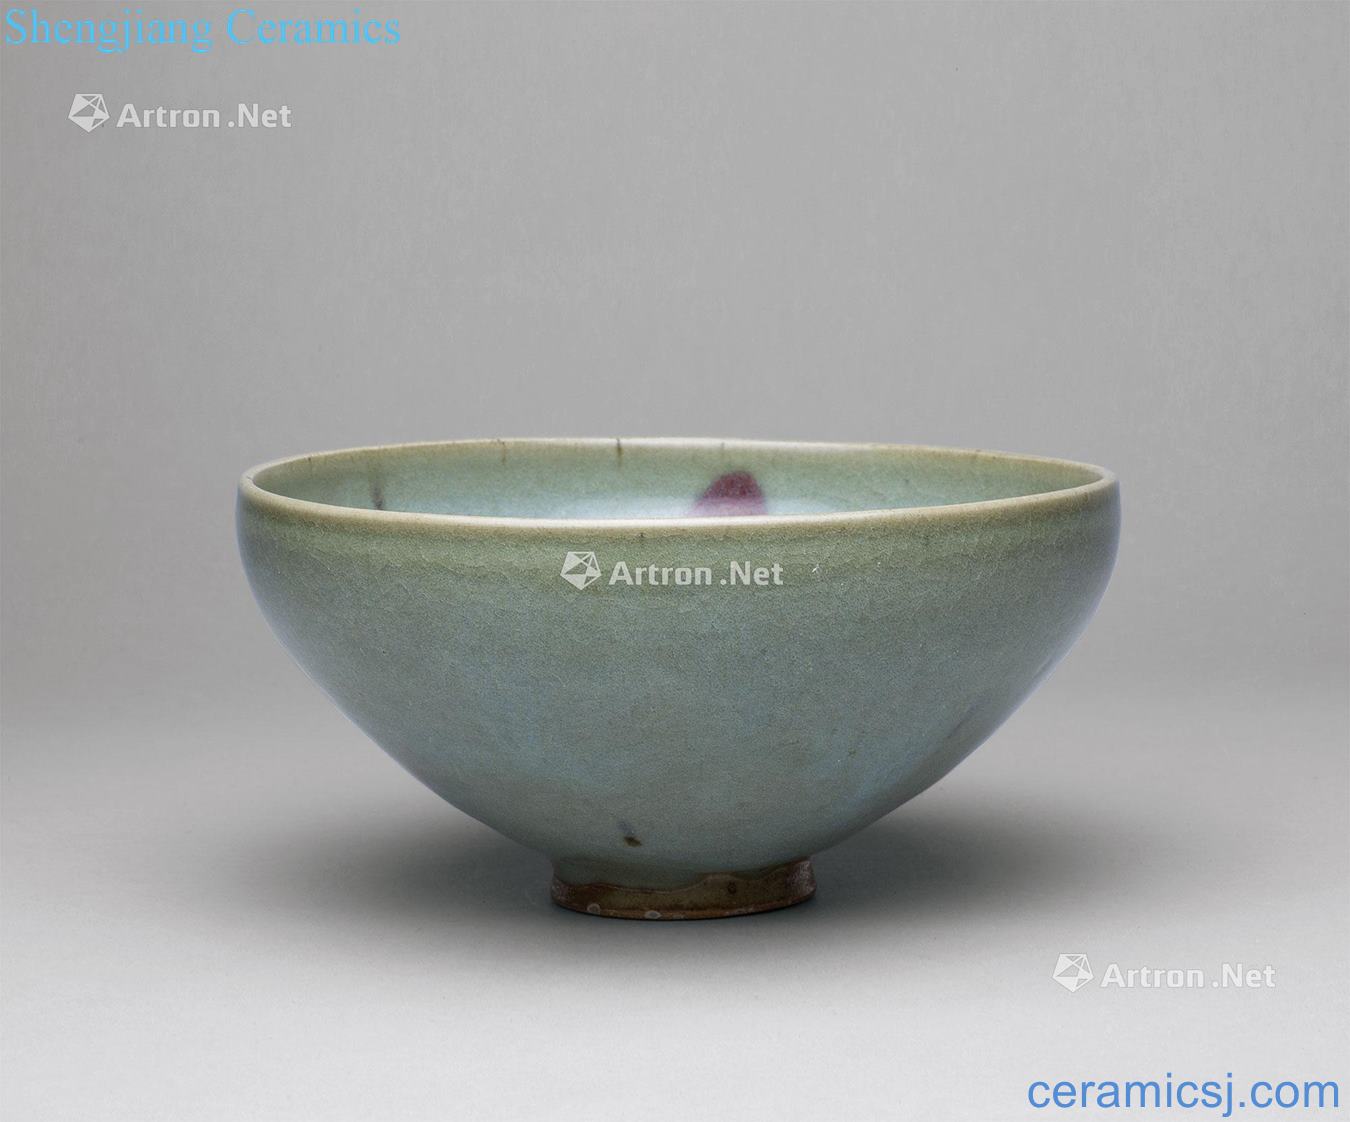 The song dynasty The azure glaze masterpieces purple bowl